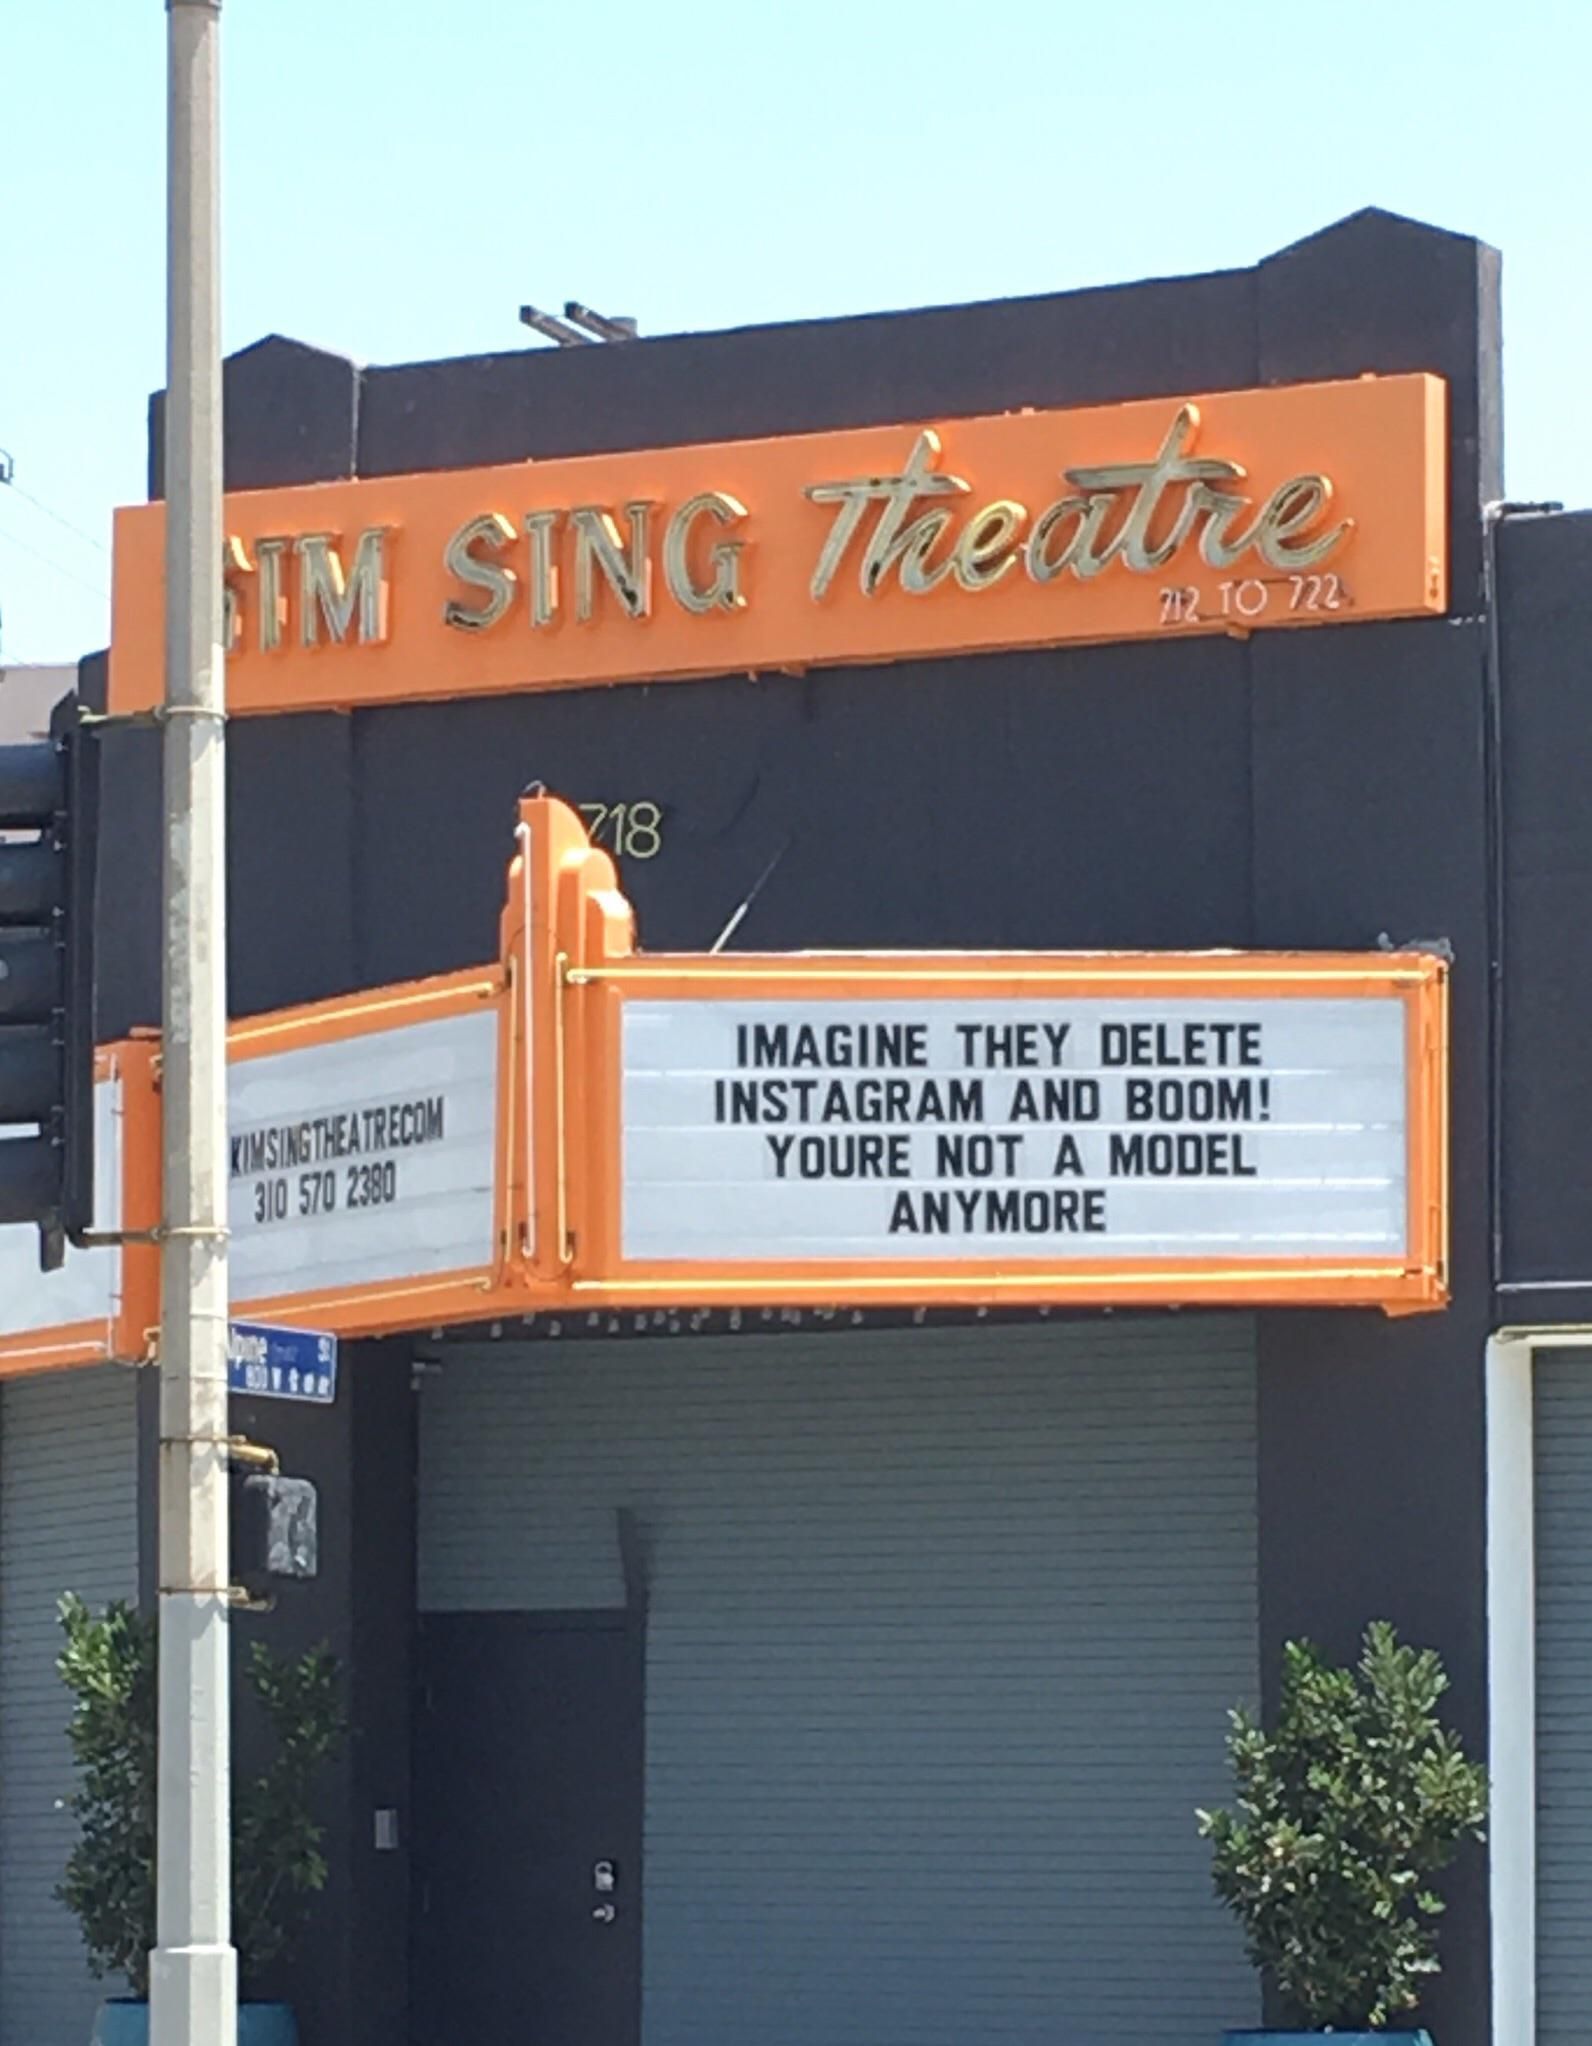 This headline at a theater